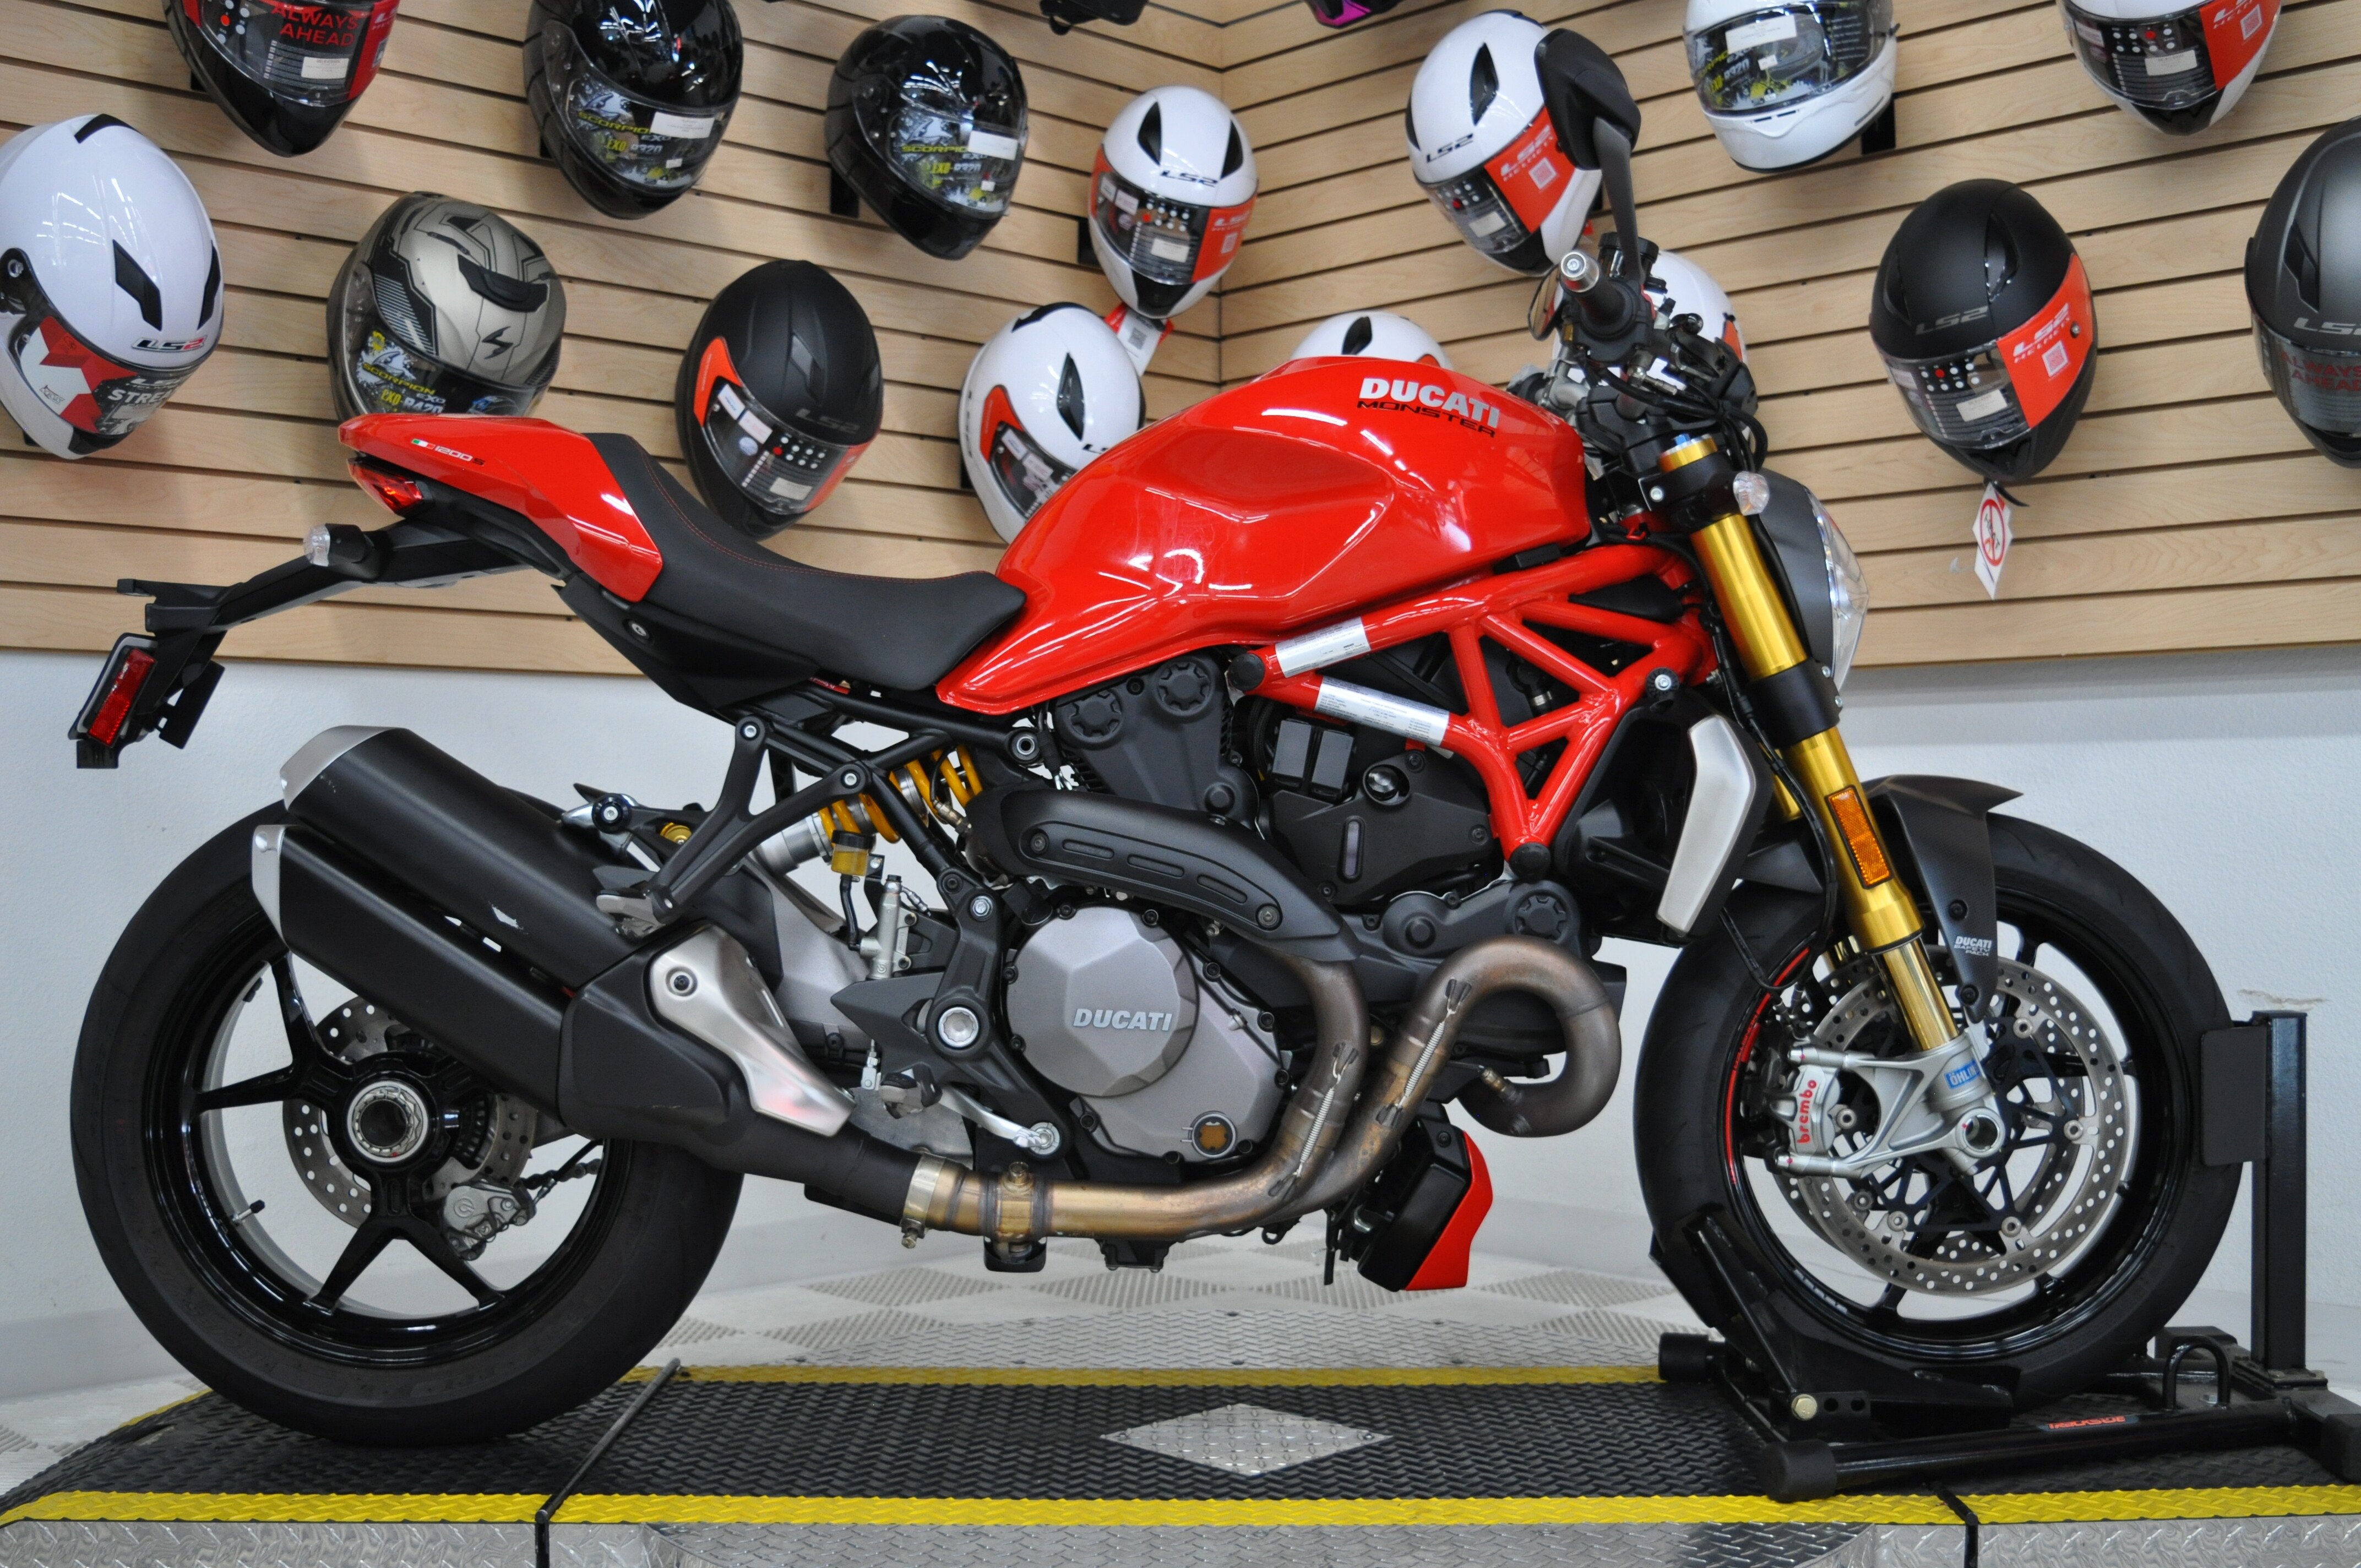 2018 Ducati Monster 1200 Motorcycles for Sale